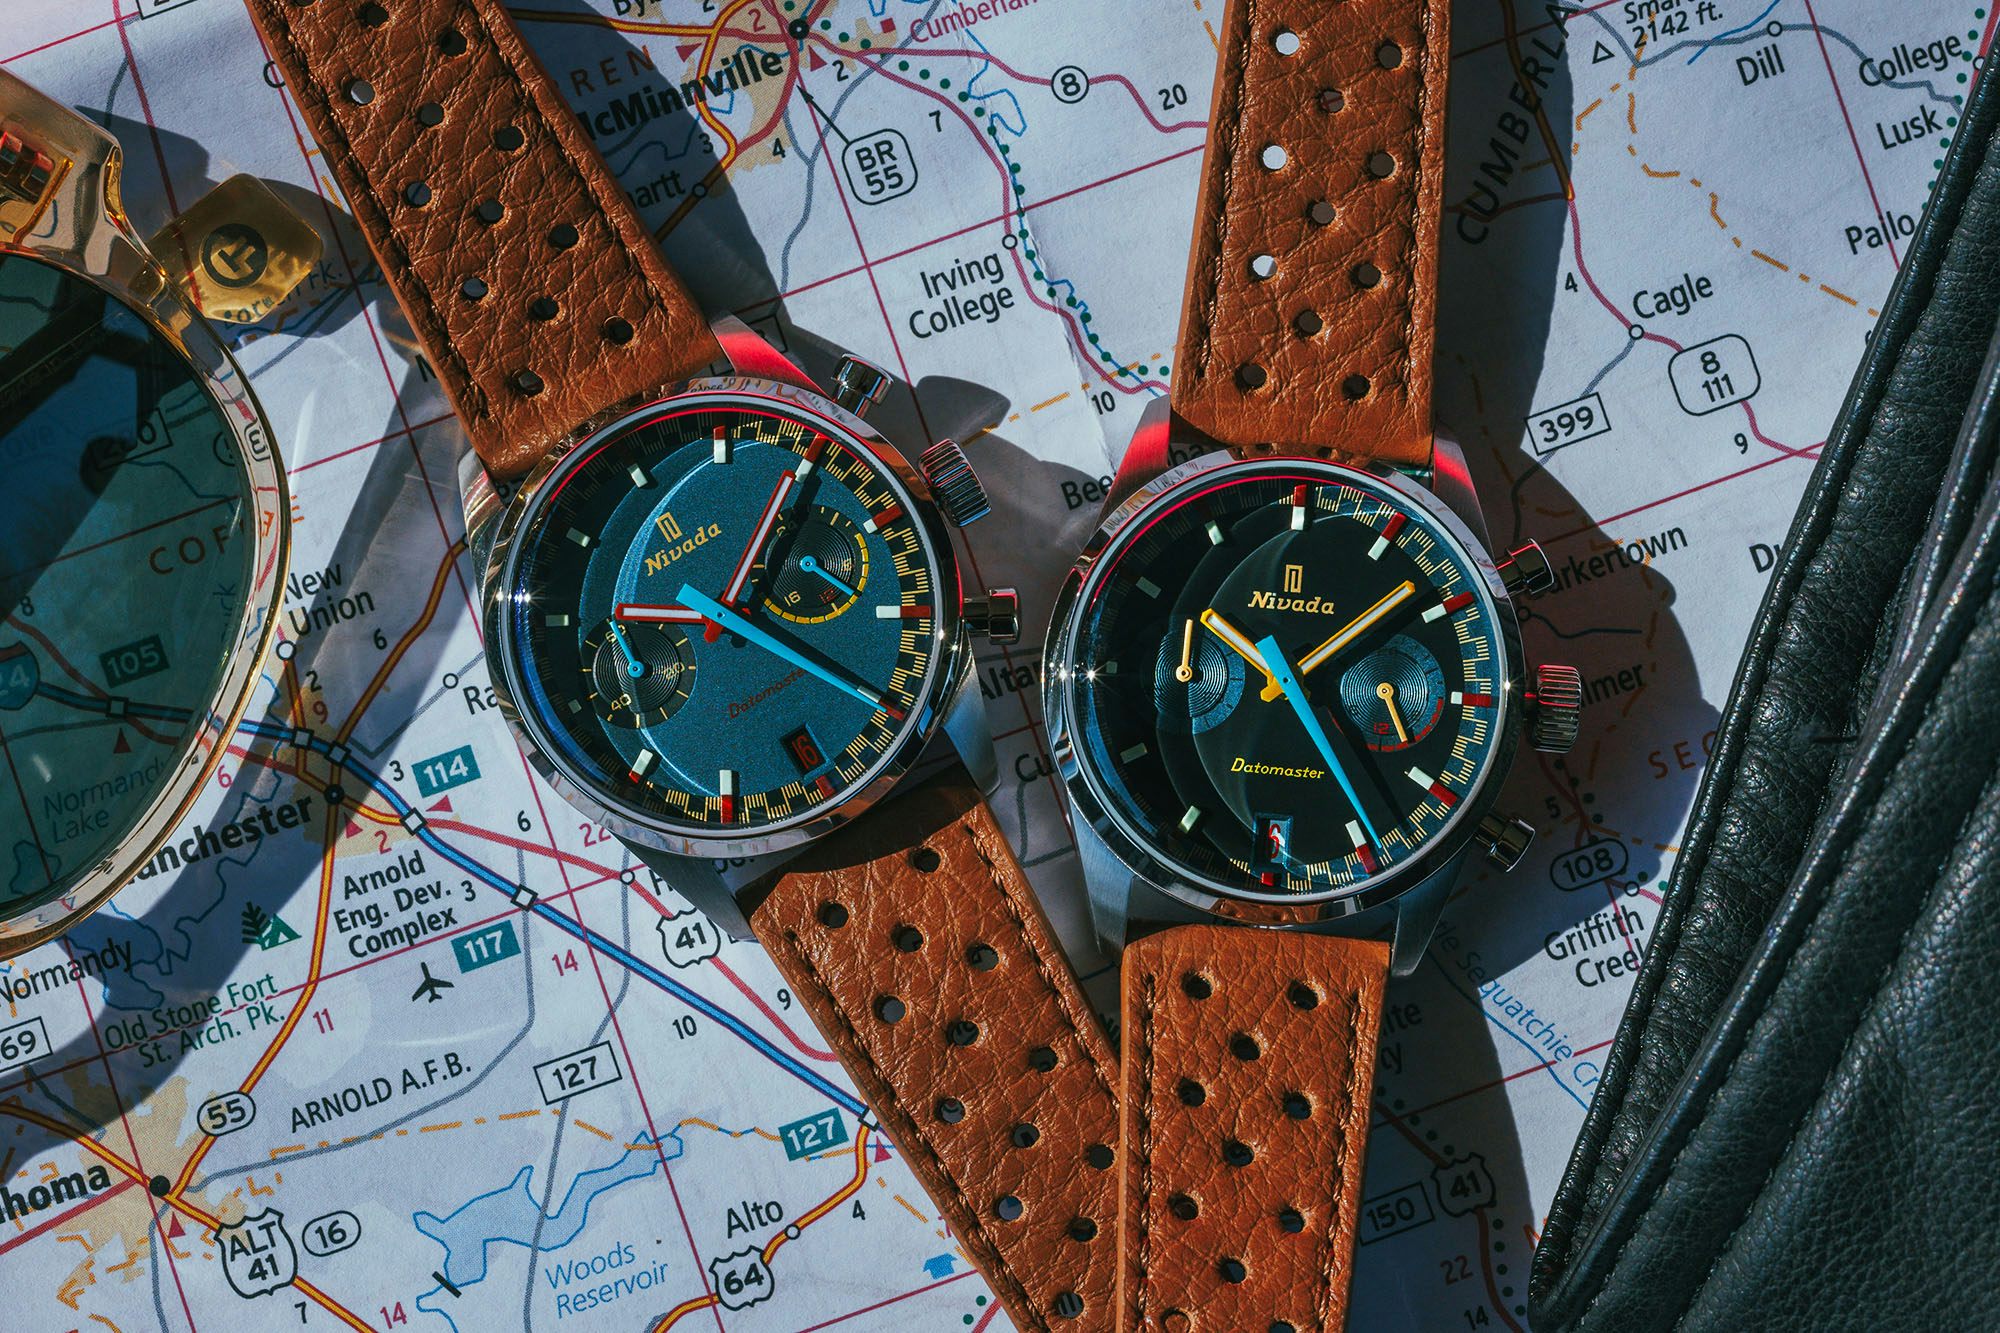 All The New Watches Of 2023 - Hodinkee